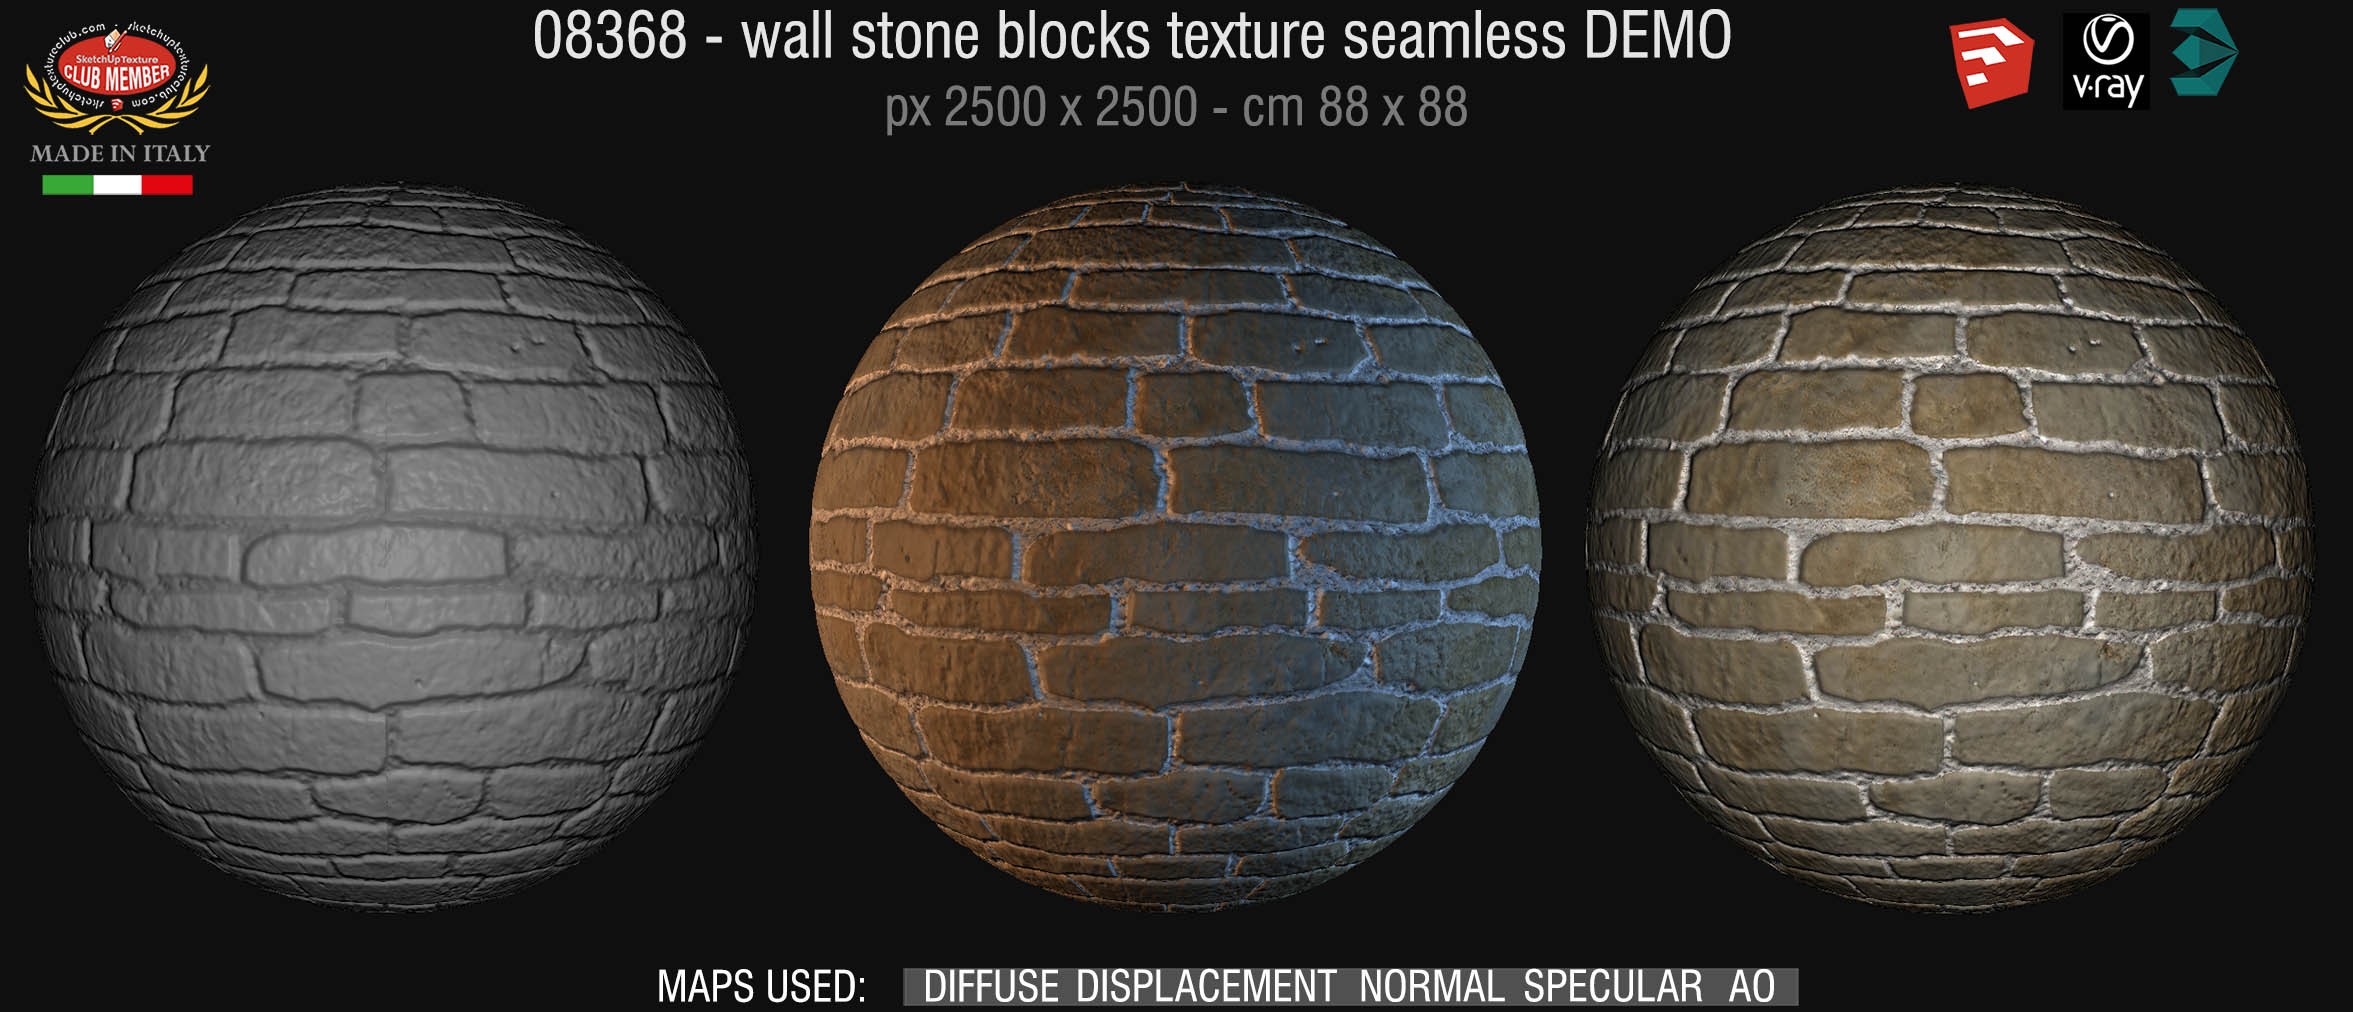 08368 HR Wall stone with regular blocks texture + maps DEMO